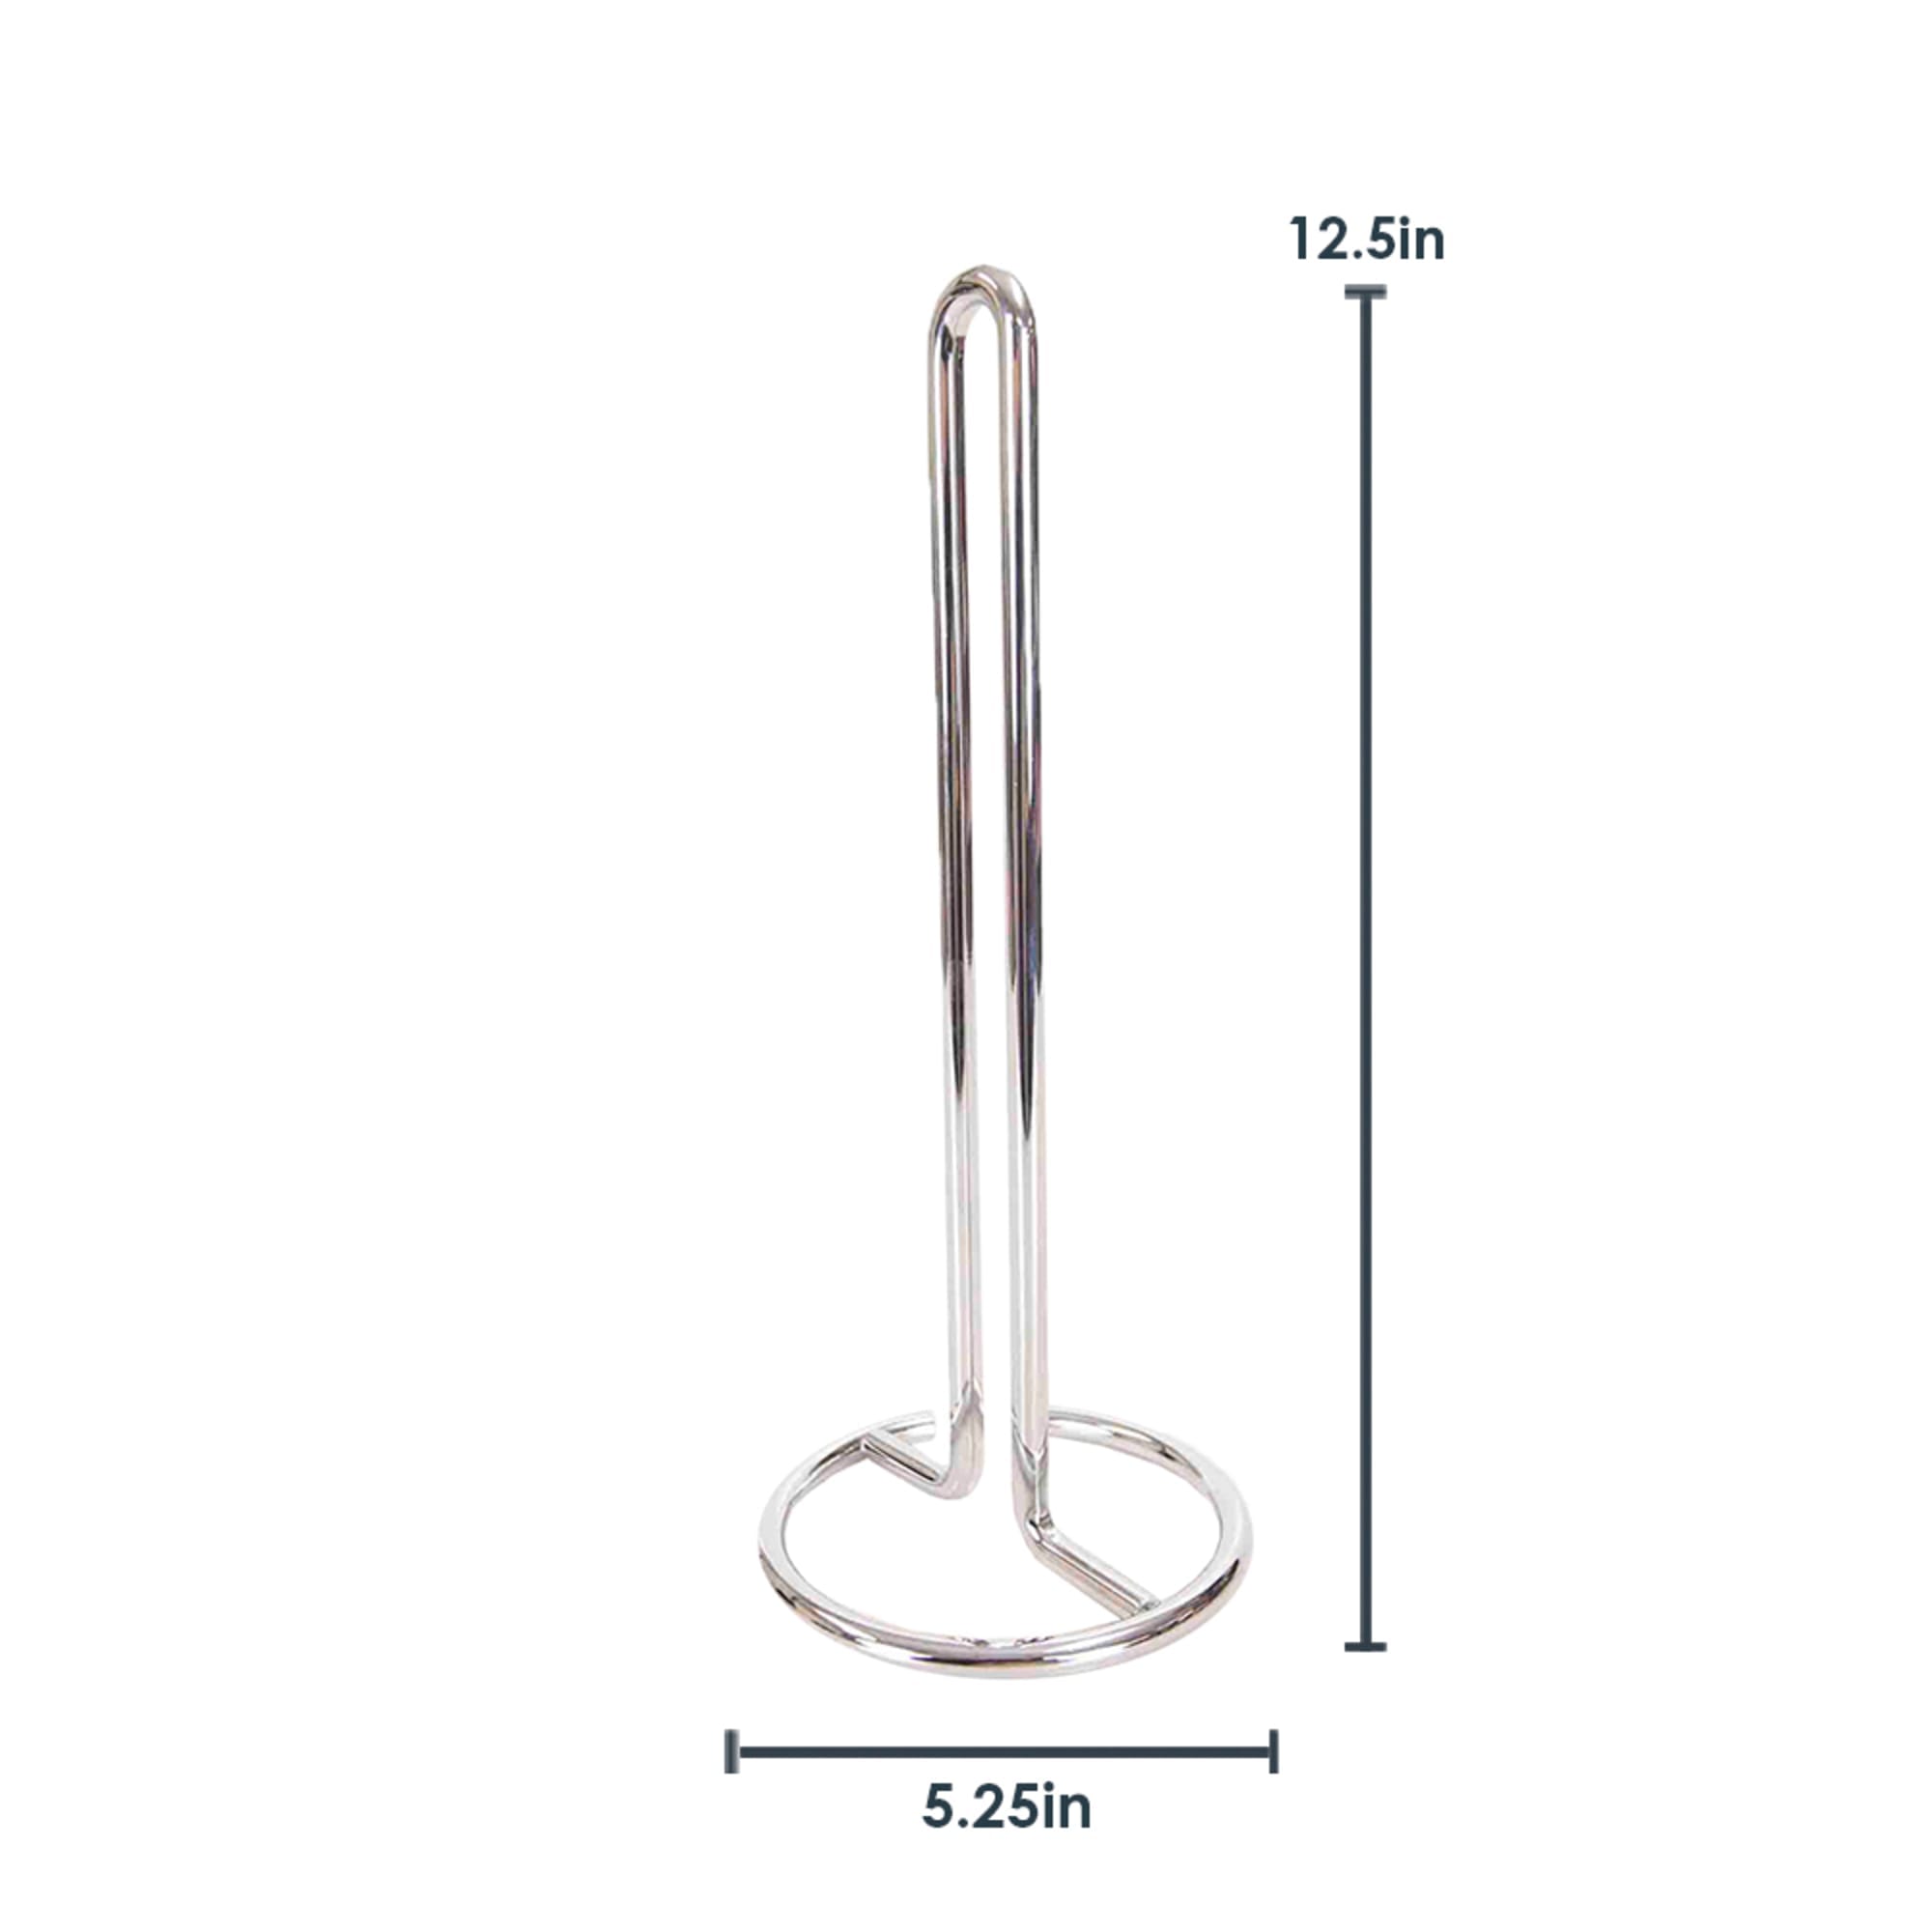 Home Basics Simplicity Collection Free-Standing Paper Towel Holder, Chrome $5.00 EACH, CASE PACK OF 12